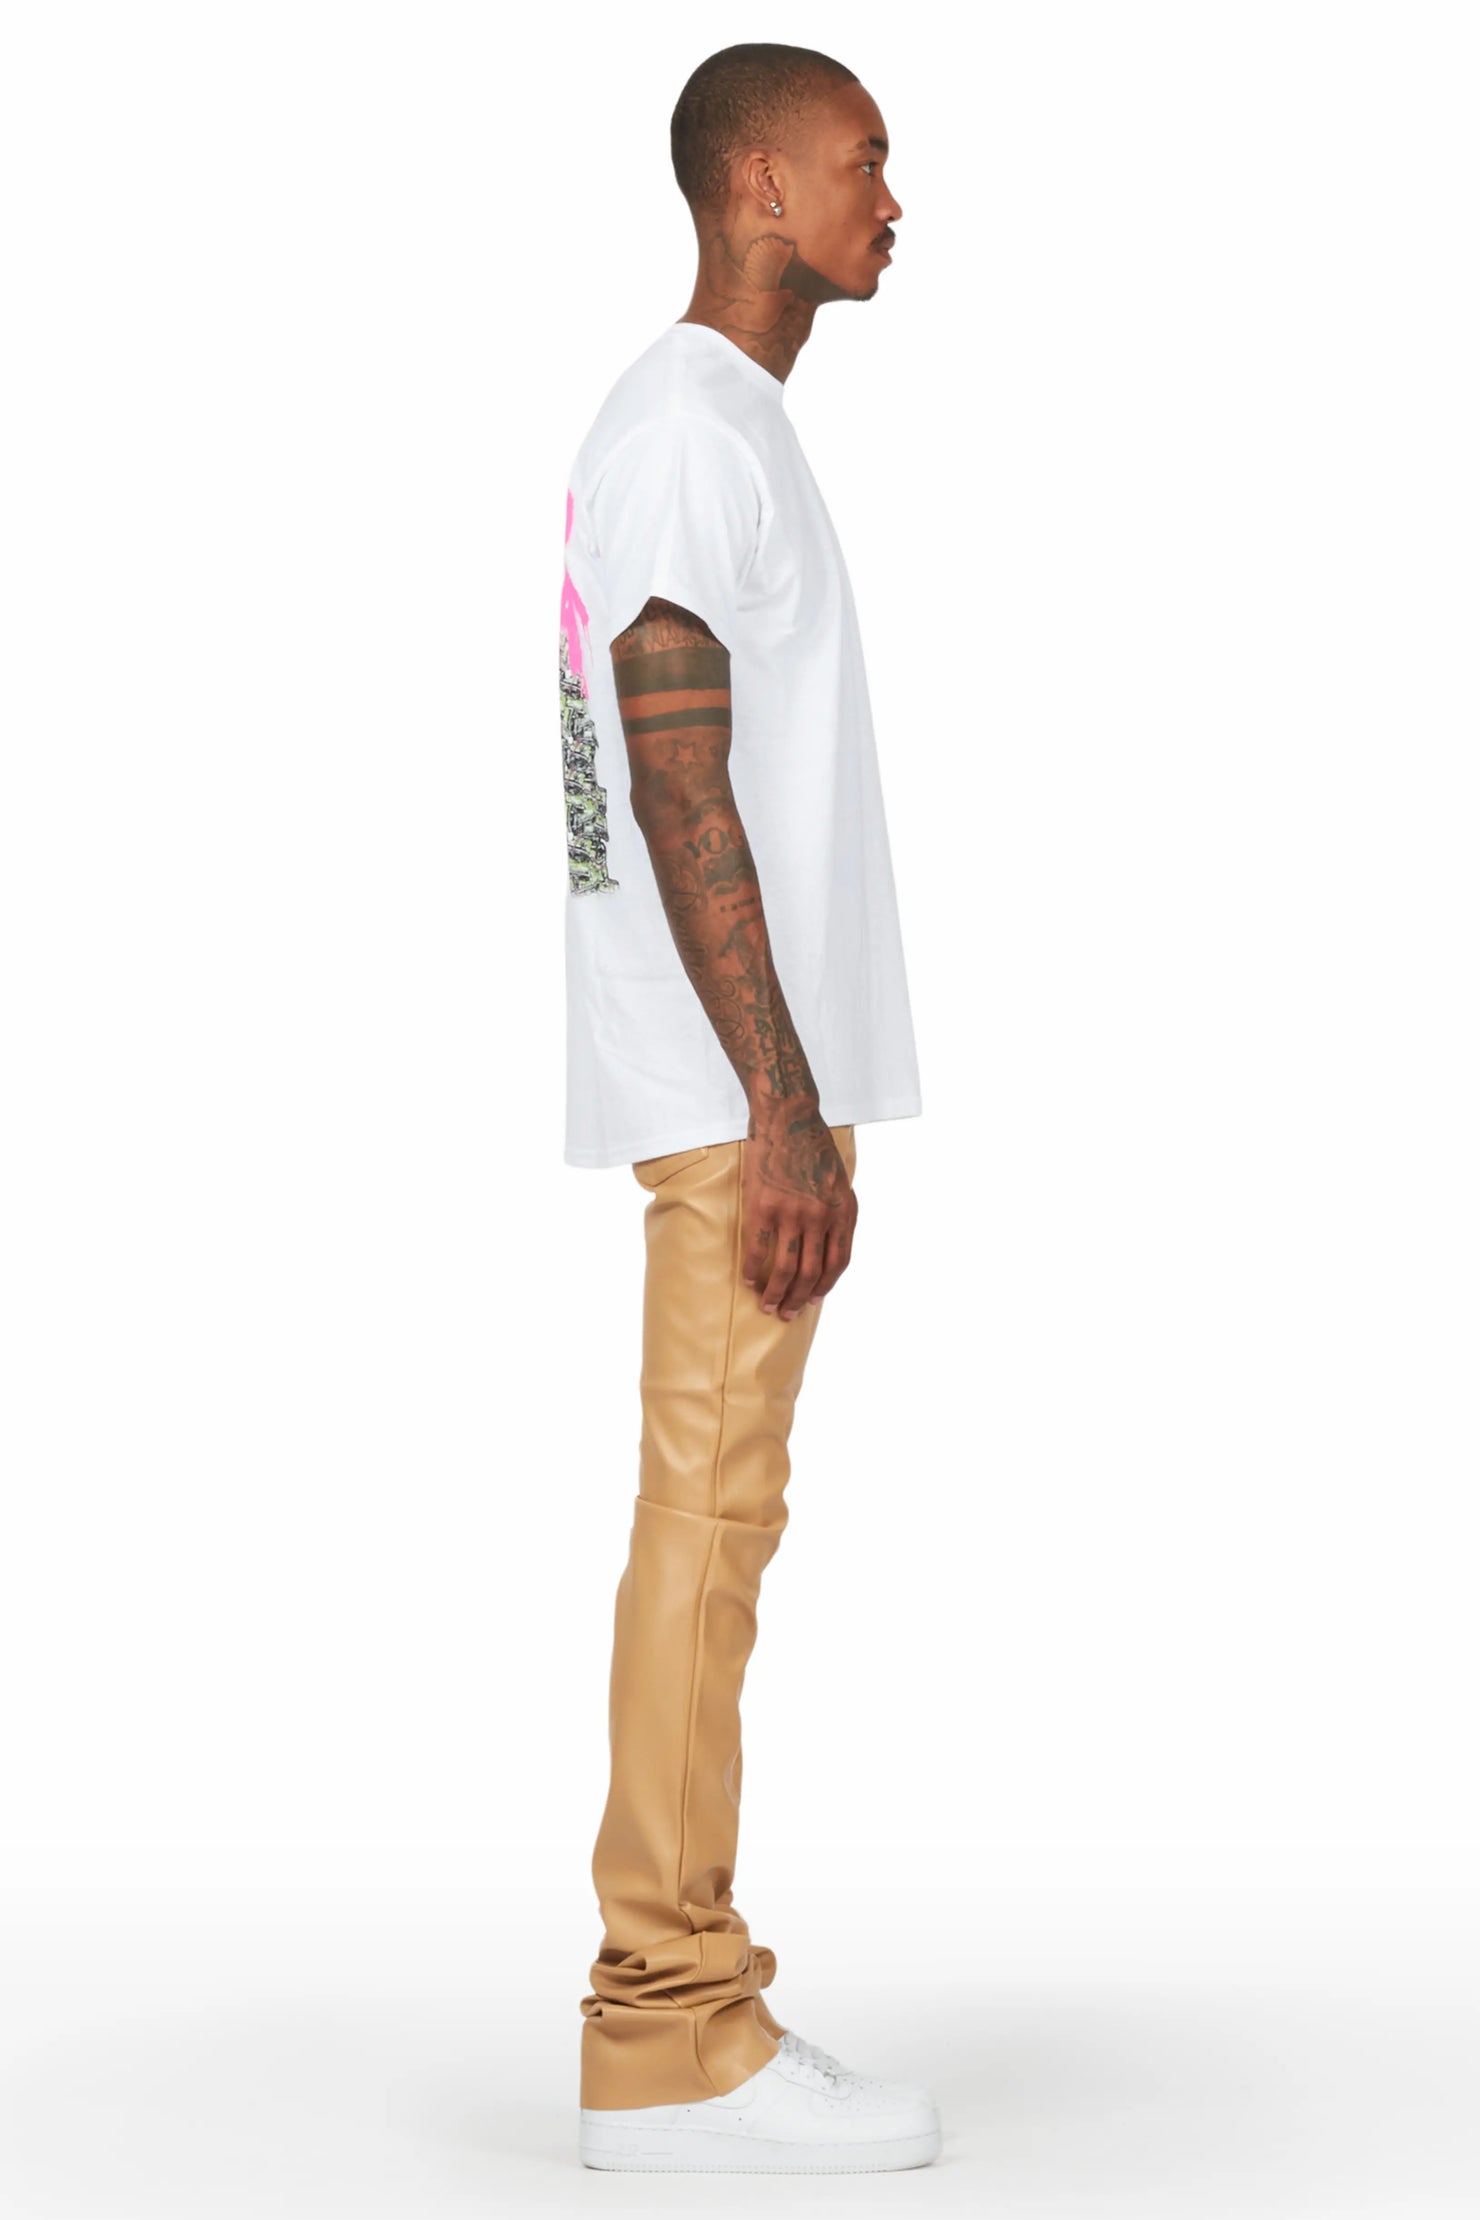 Badbich White T-Shirt & Ricky Tan Super Stacked Faux Leather Pant Bundle